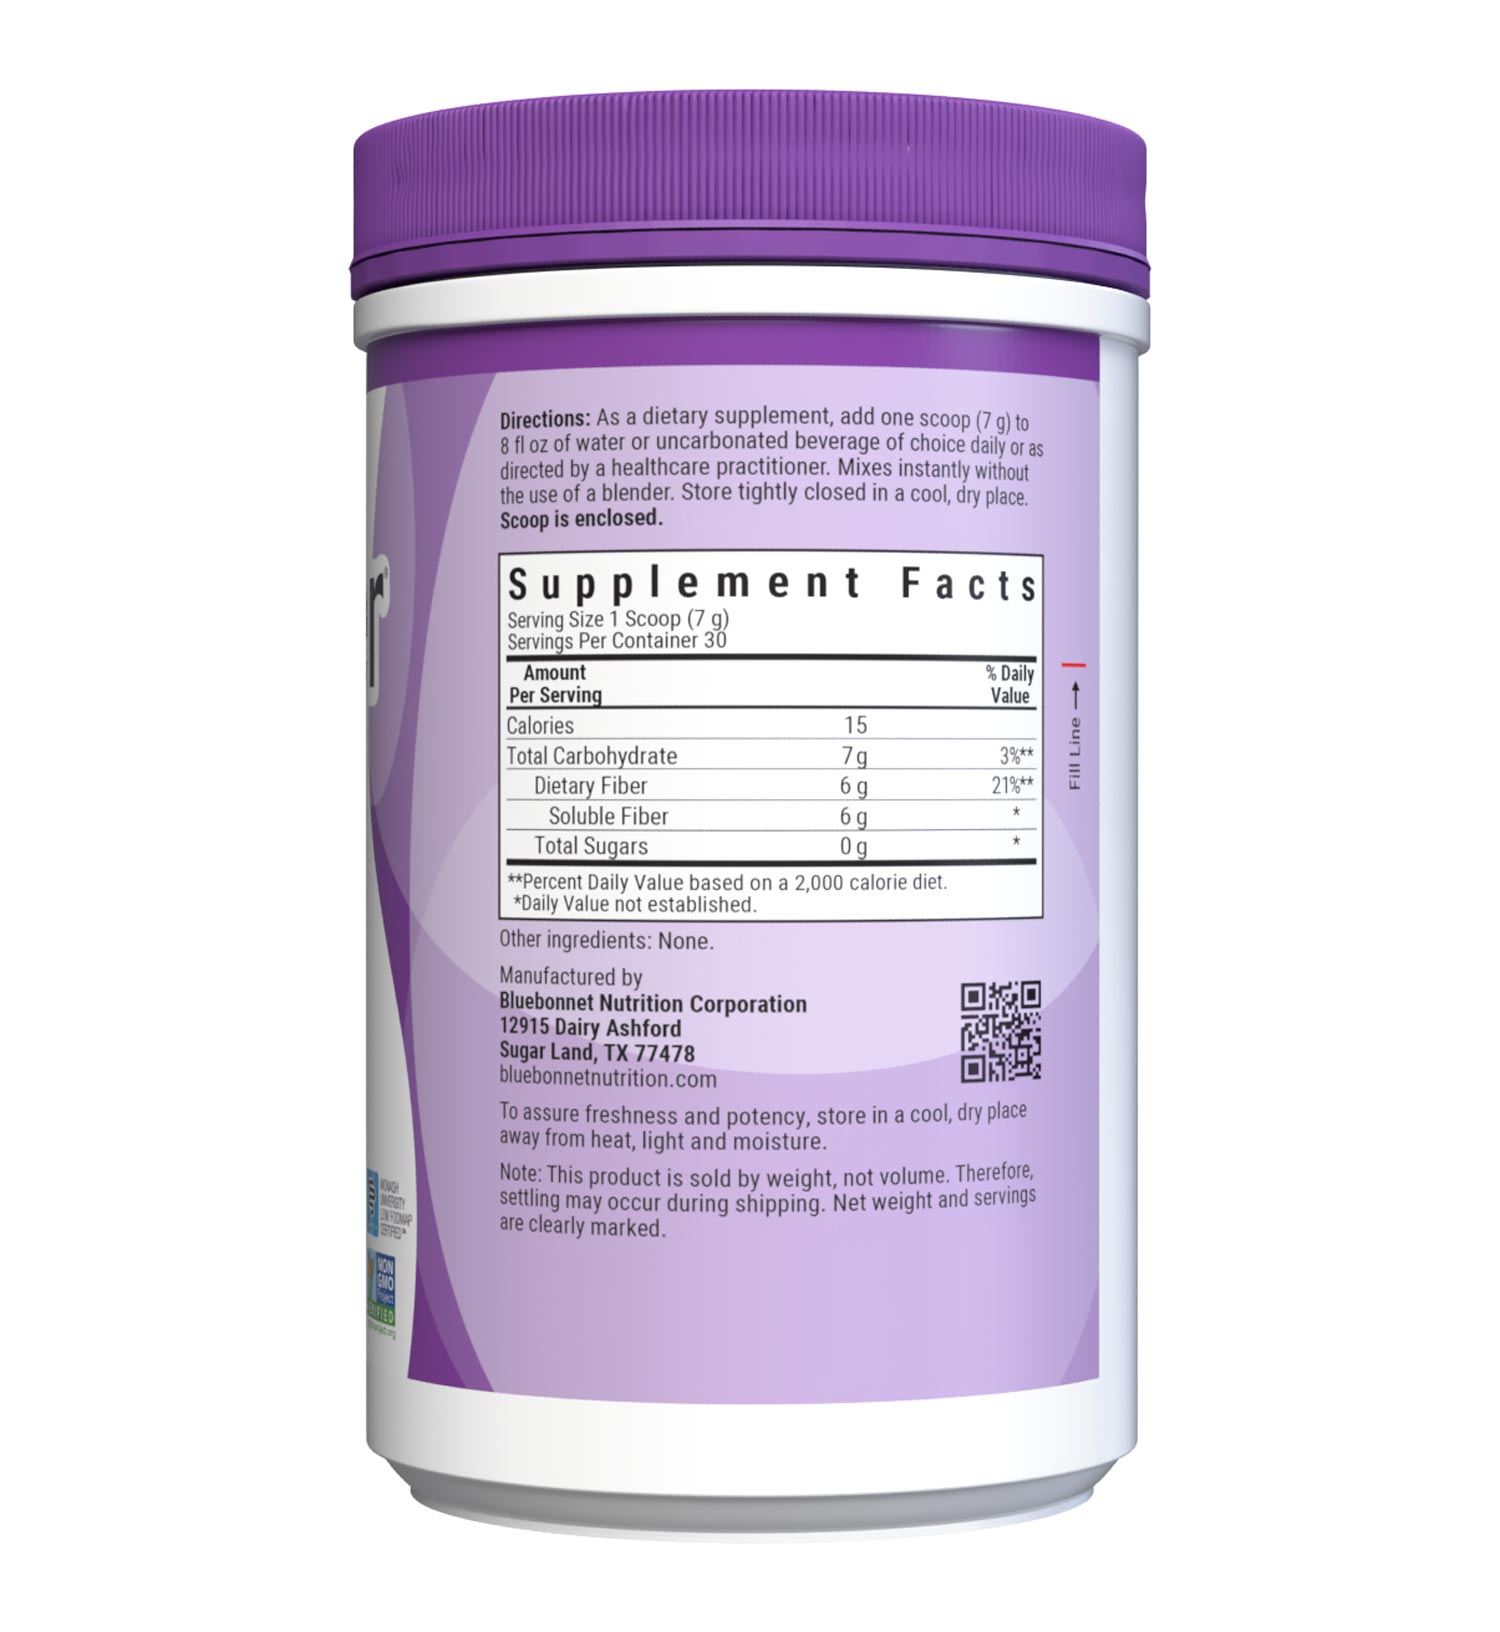 Bluebonnet’s Sunfiber® Powder delivers plant-based dietary fiber from partially hydrolyzed guar gum to help support bowel regularity while also providing prebiotic benefits for gastrointestinal health. This soluble and slow-fermenting fiber is well tolerated and suitable for those following a low-FODMAP diet. Supplement Facts panel. #size_7.4 oz